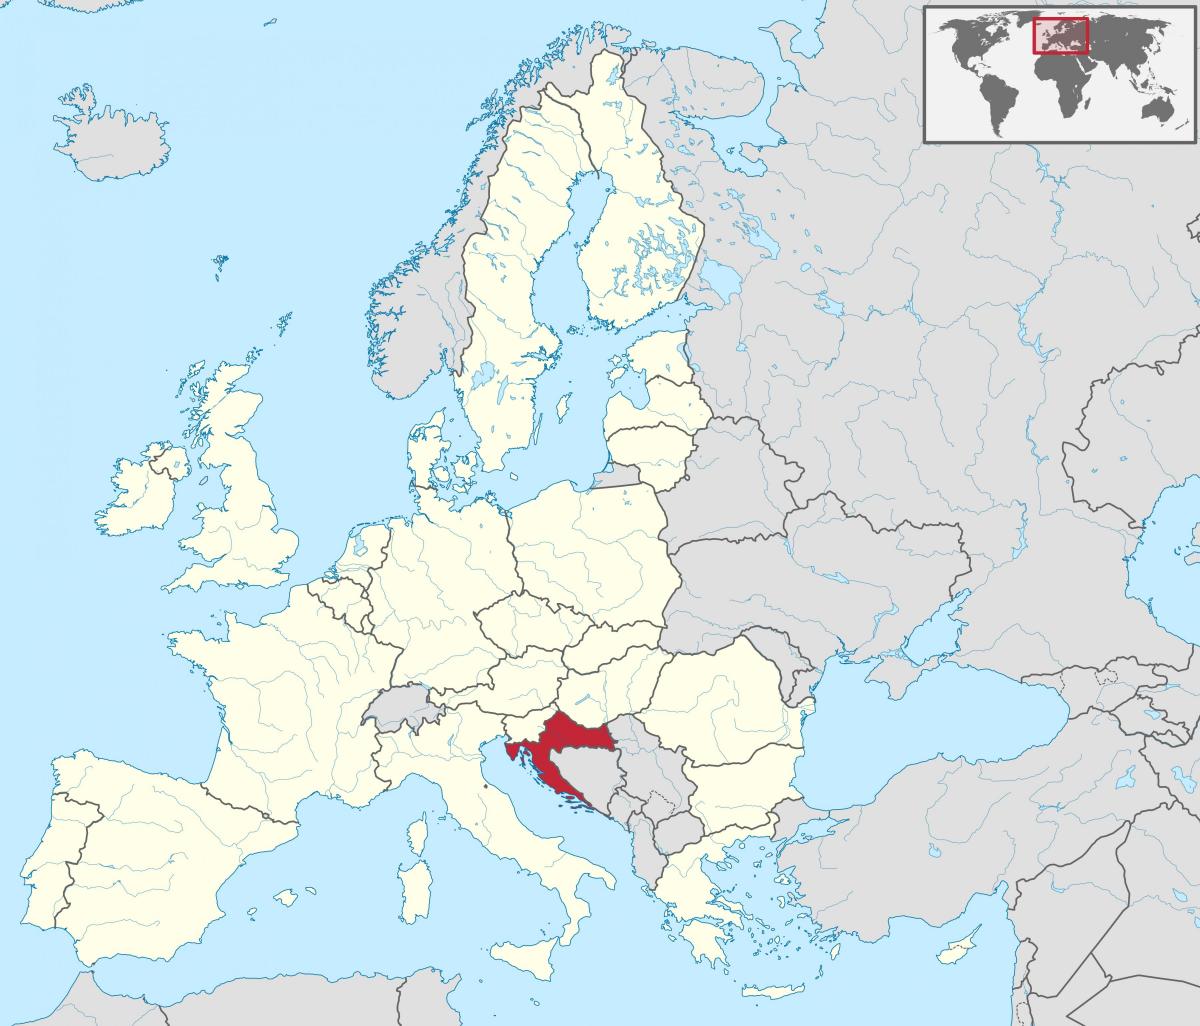 Croatia location on the Southern Europe map